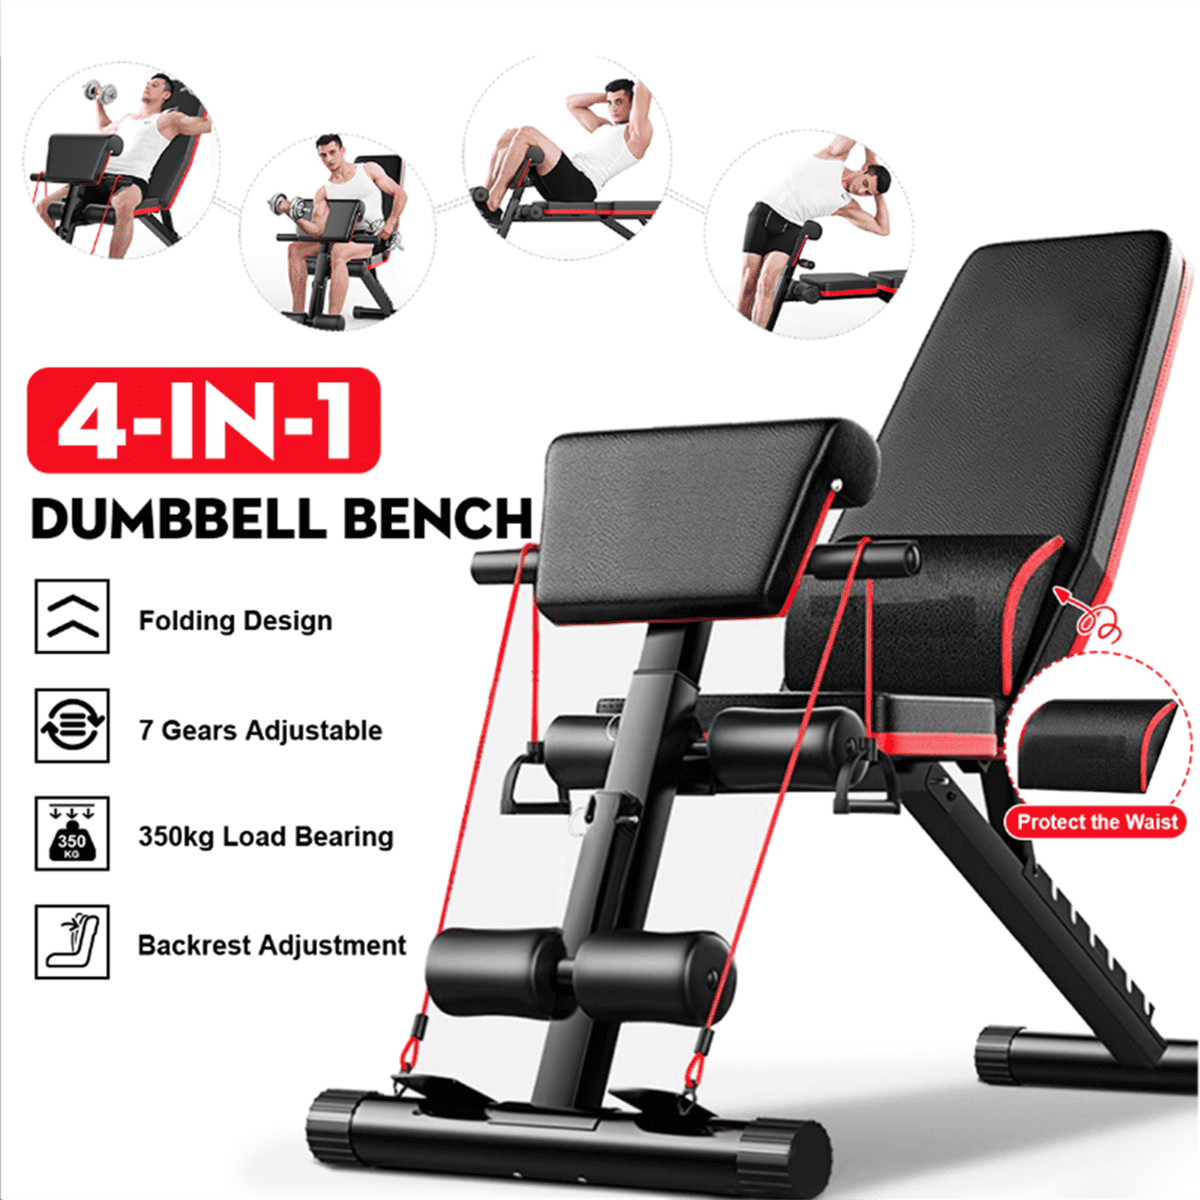 Weight Bench Dumbbell Rack Adjustable Flat Incline Sit Up Exercise Gym Workout 